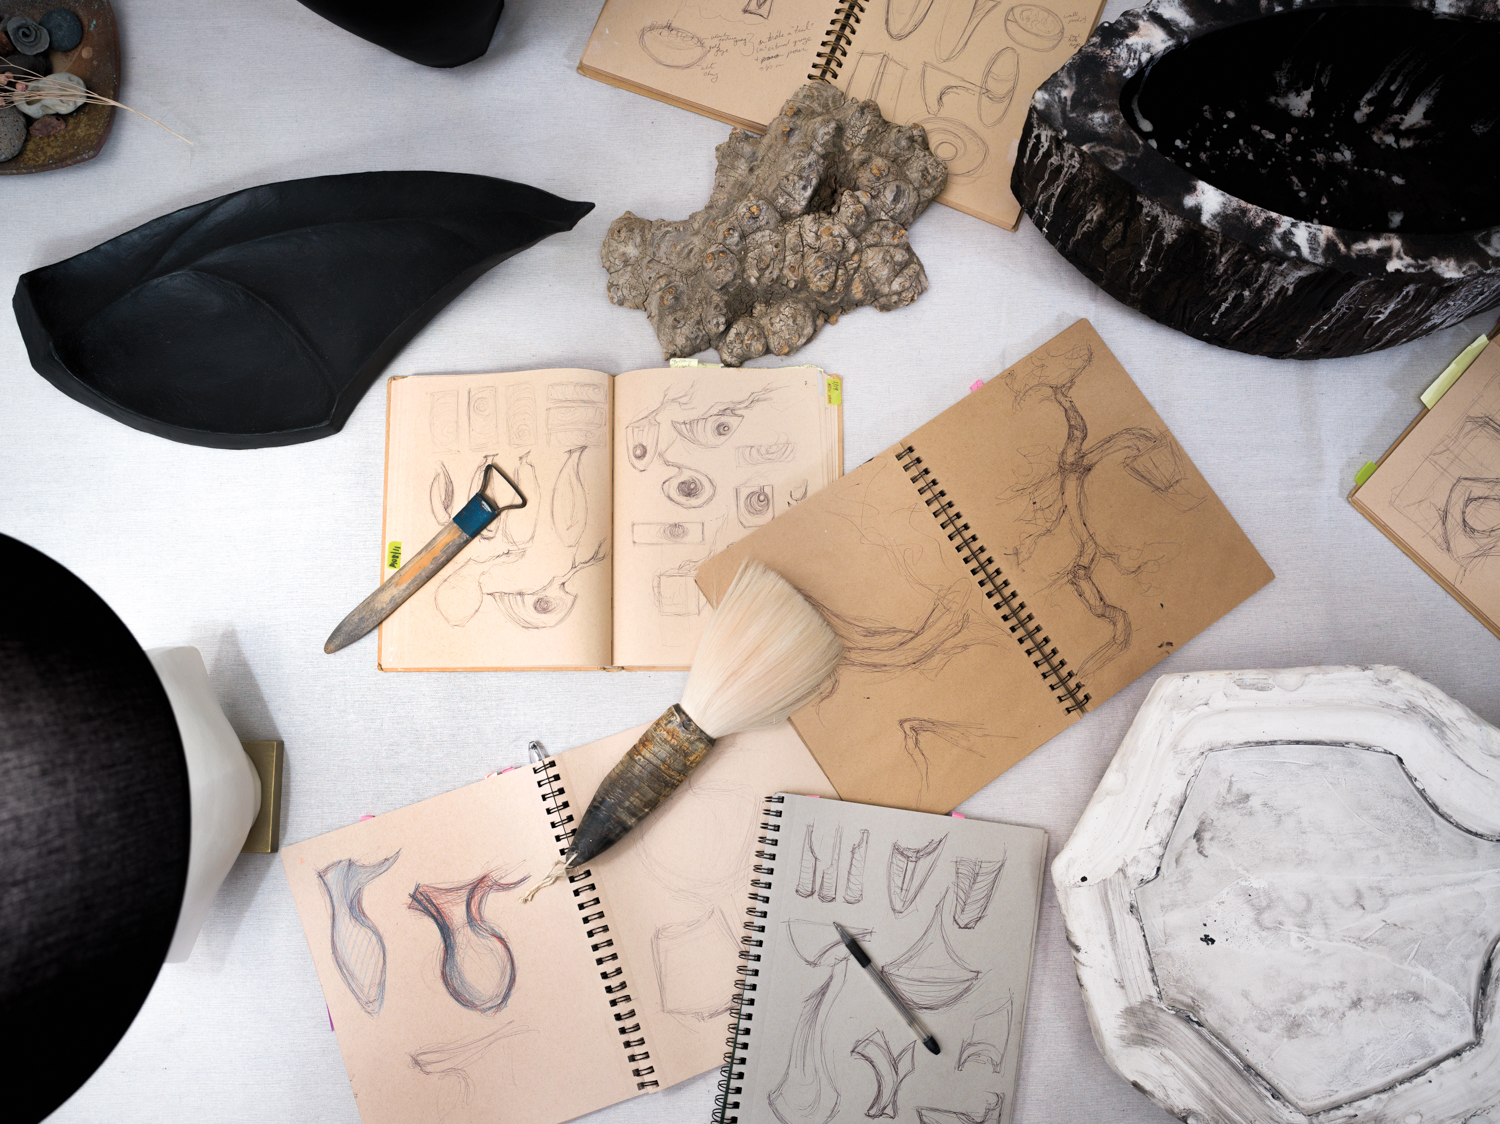 Sketchbooks, brushes, tools and pieces of clay on a table